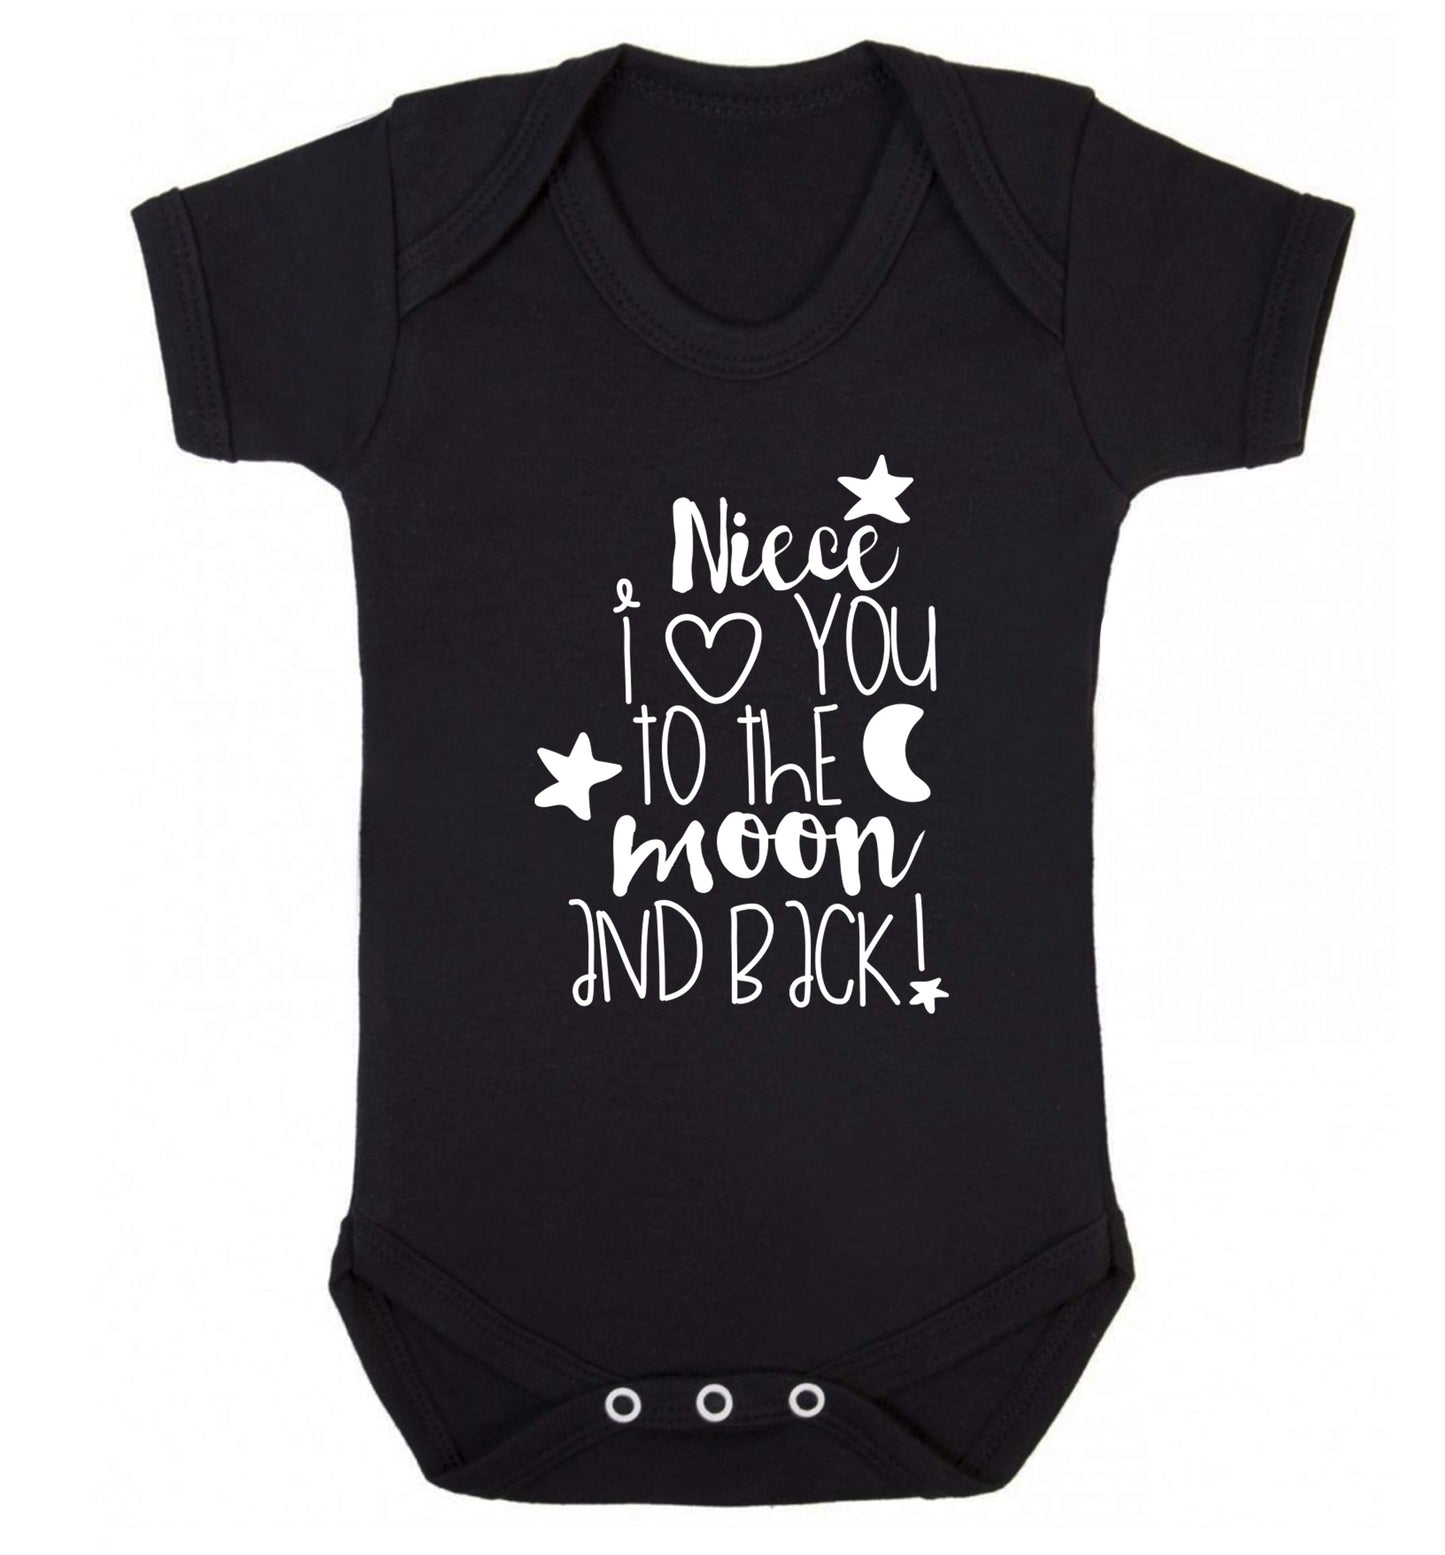 Niece I love you to the moon and back Baby Vest black 18-24 months